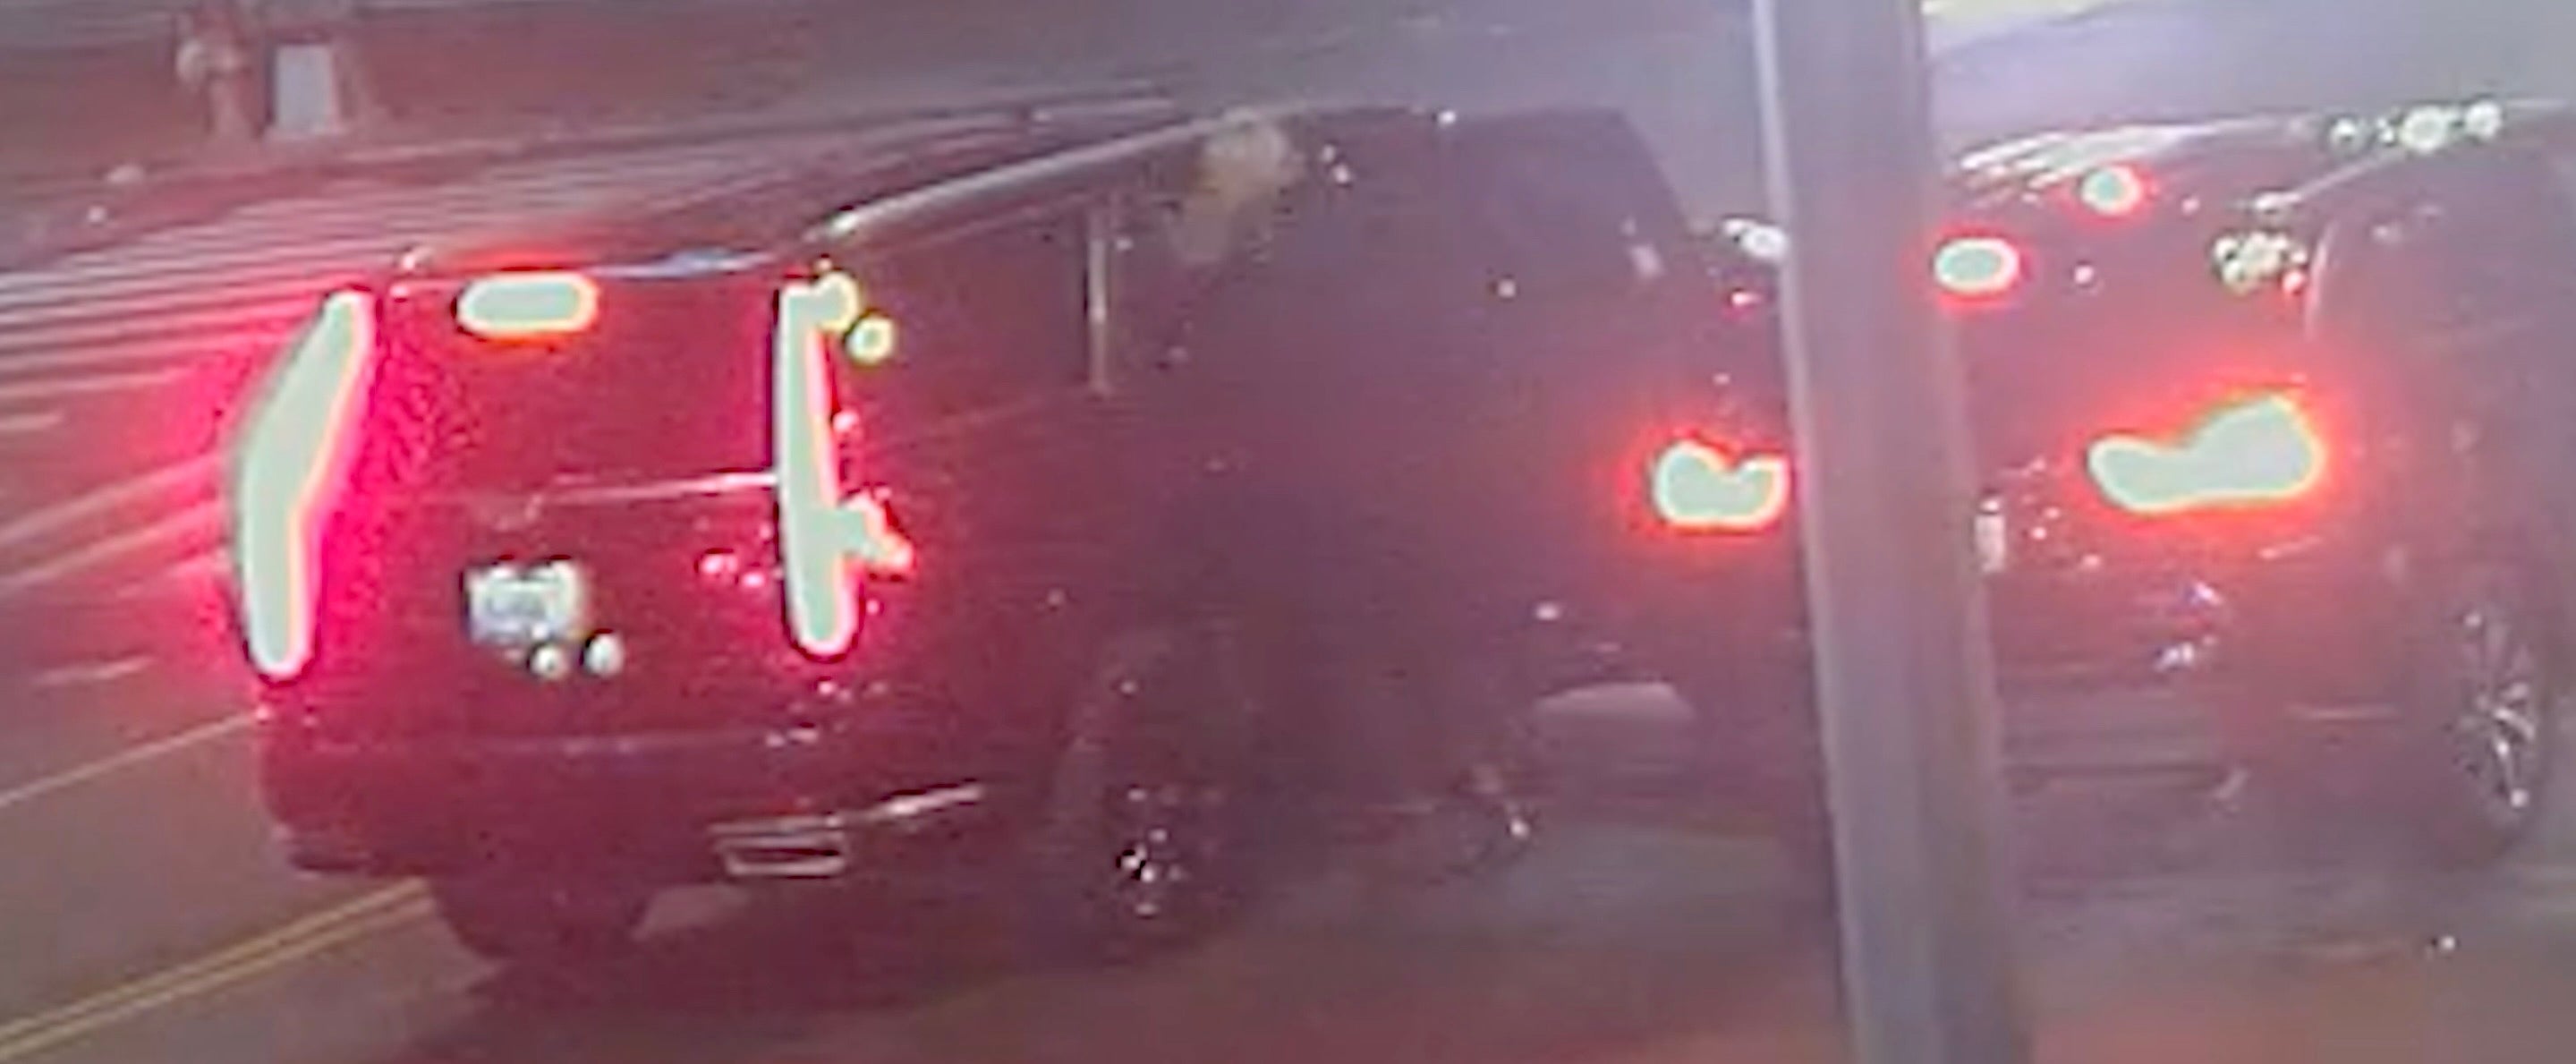 Grace Jabbari and Jonathan Majors seen in surveillance footage from March 25, when the alleged incident at the centre of the actor’s assault trial occurred